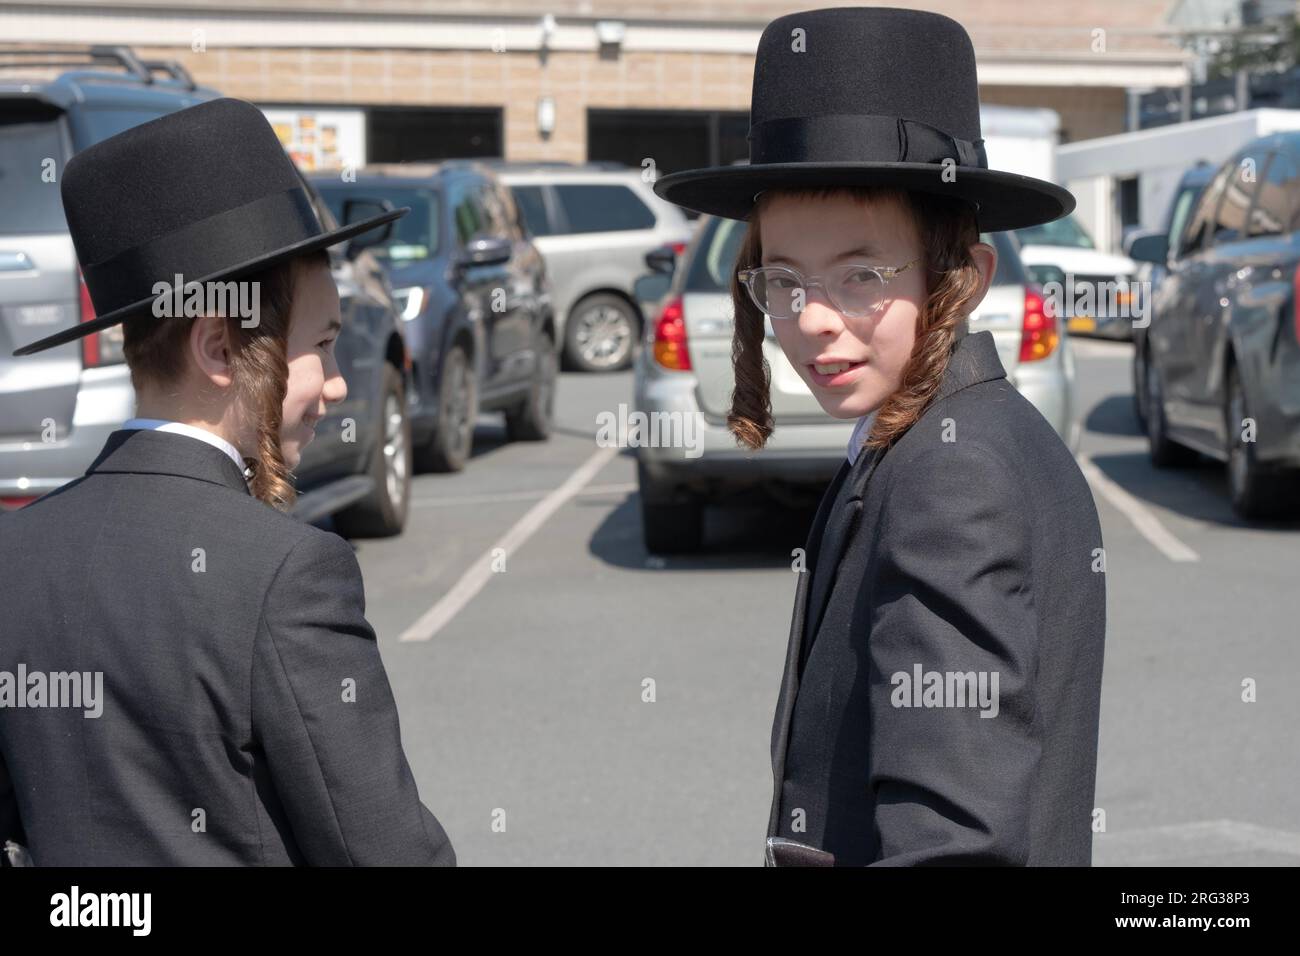 2 Satmar teenagers with long peyus stop for a photo on the way to shopping at the Kiryas Joel Shopping Center in Orange County New York. Stock Photo